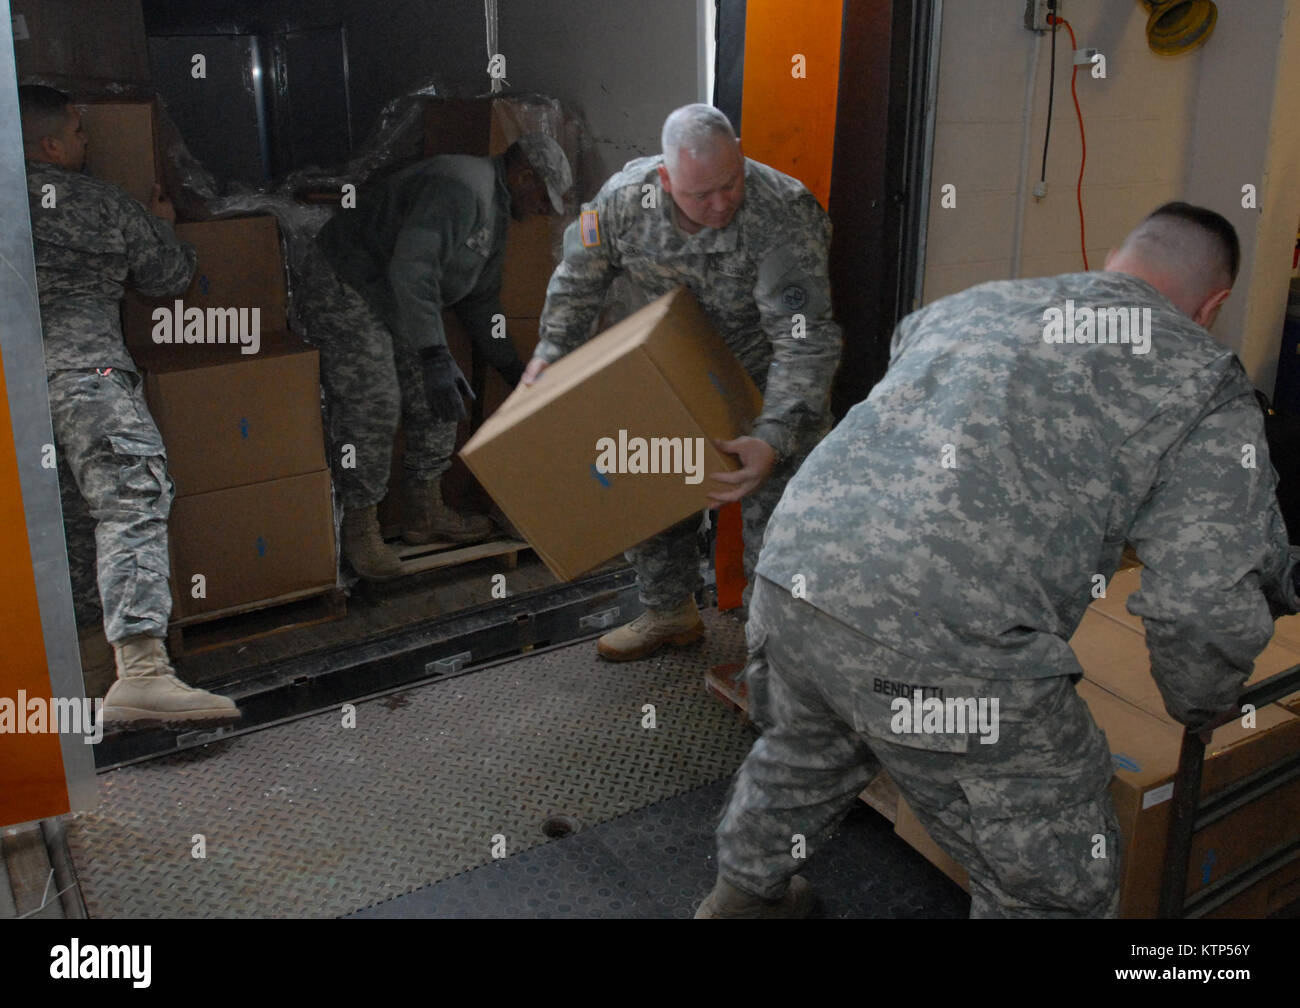 CARMEL, NY -- New York Army National Guard Soldiers Spc. Juan Sanchez (left), Sgt. Christopher Benitez (middle left), Pfc. John Fasanaro (middle right), and Spc. Daniel Bendetti (right) unload boxes of disaster and emergency response starter kits before a session of New York Governor Andrew Cuomo's Citizen Preparedness Corps Training Program at Paladin Center here on March 7. New York National Guard troops gave disaster and emergency training to more than 121 people who attended the event. The program is designed to give citizens the knowledge and tools to prepare for emergencies and disasters Stock Photo